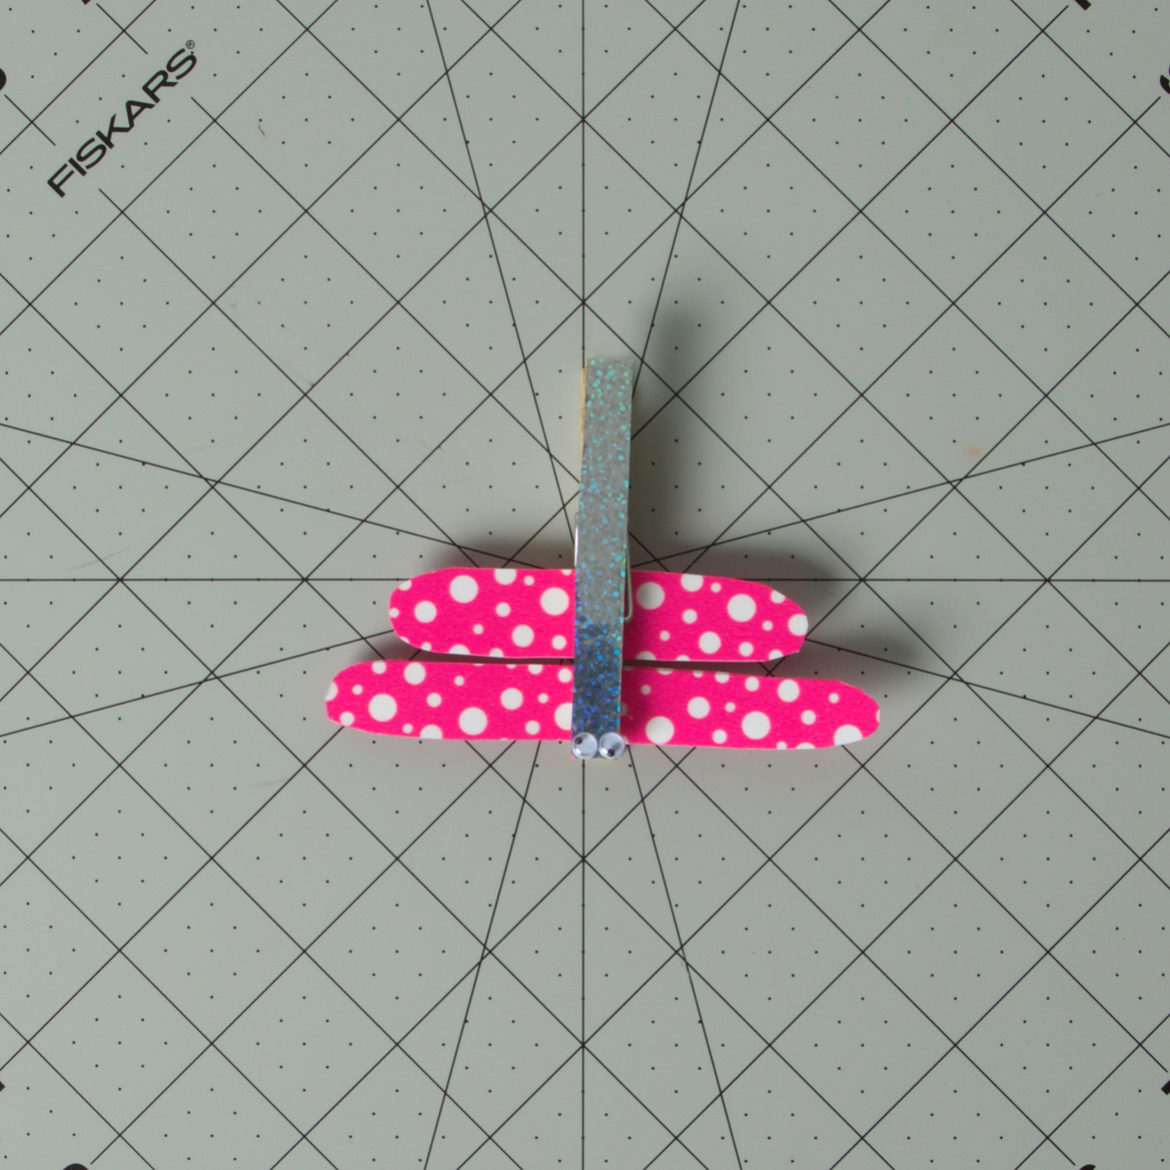 googly eyes added to the clothes pin to complete the dragonfly